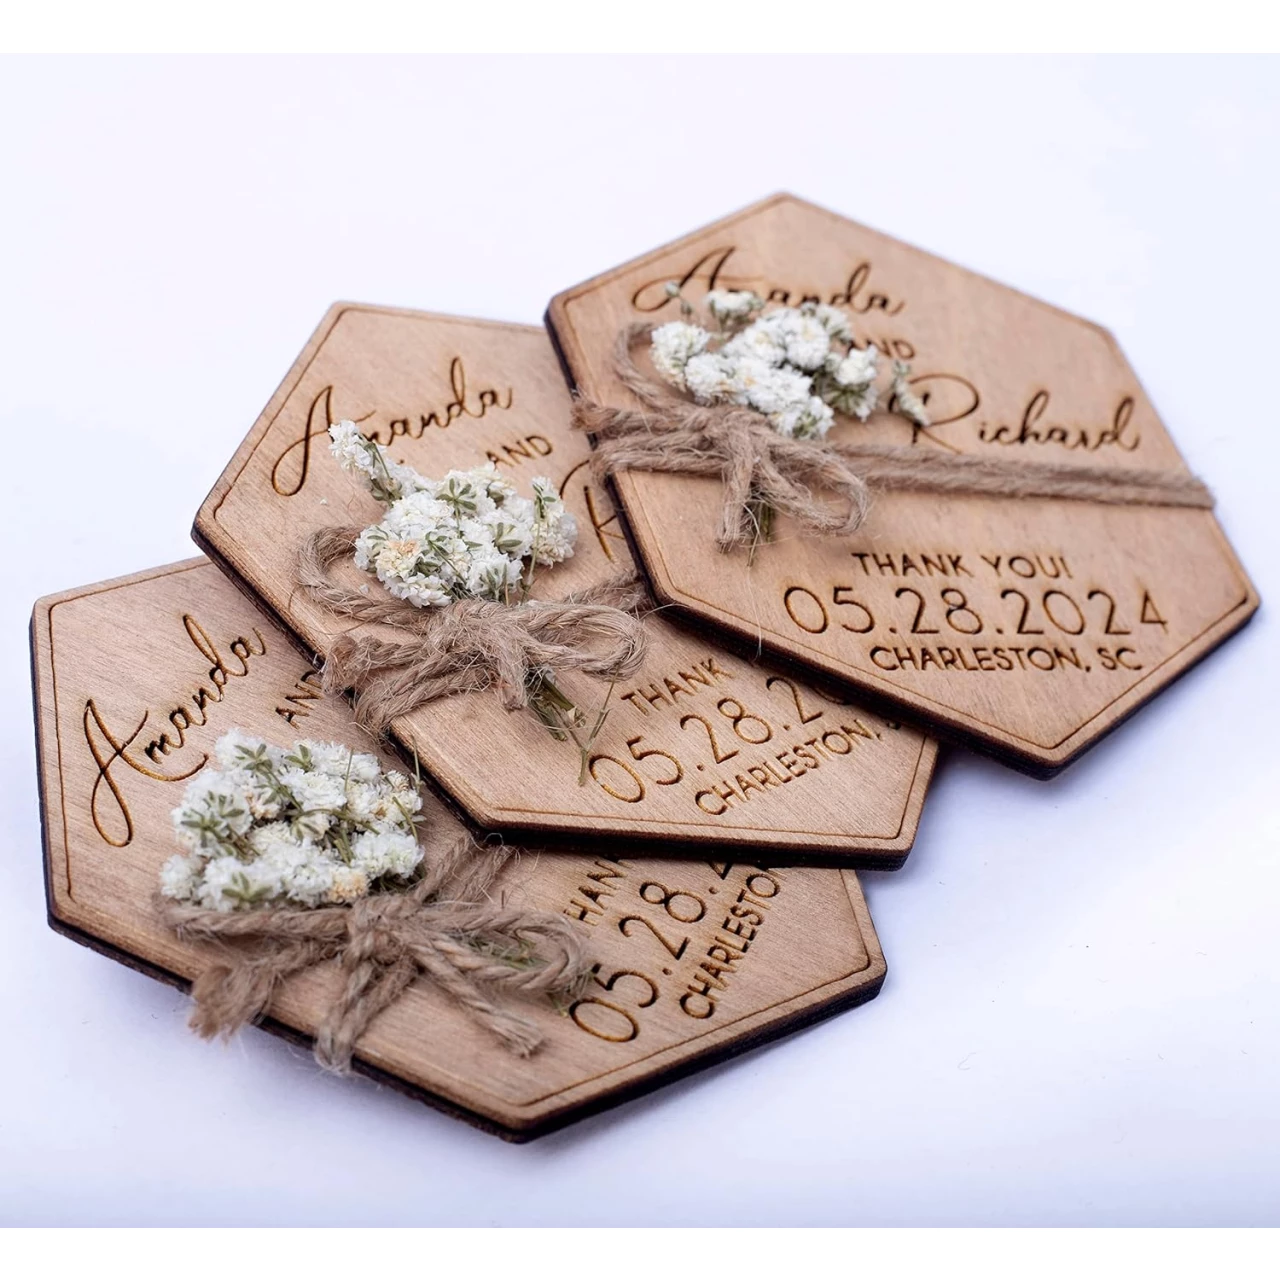 Hexagon Floral Wedding Favors, Personalized Wedding Favor, Wooden Magnet